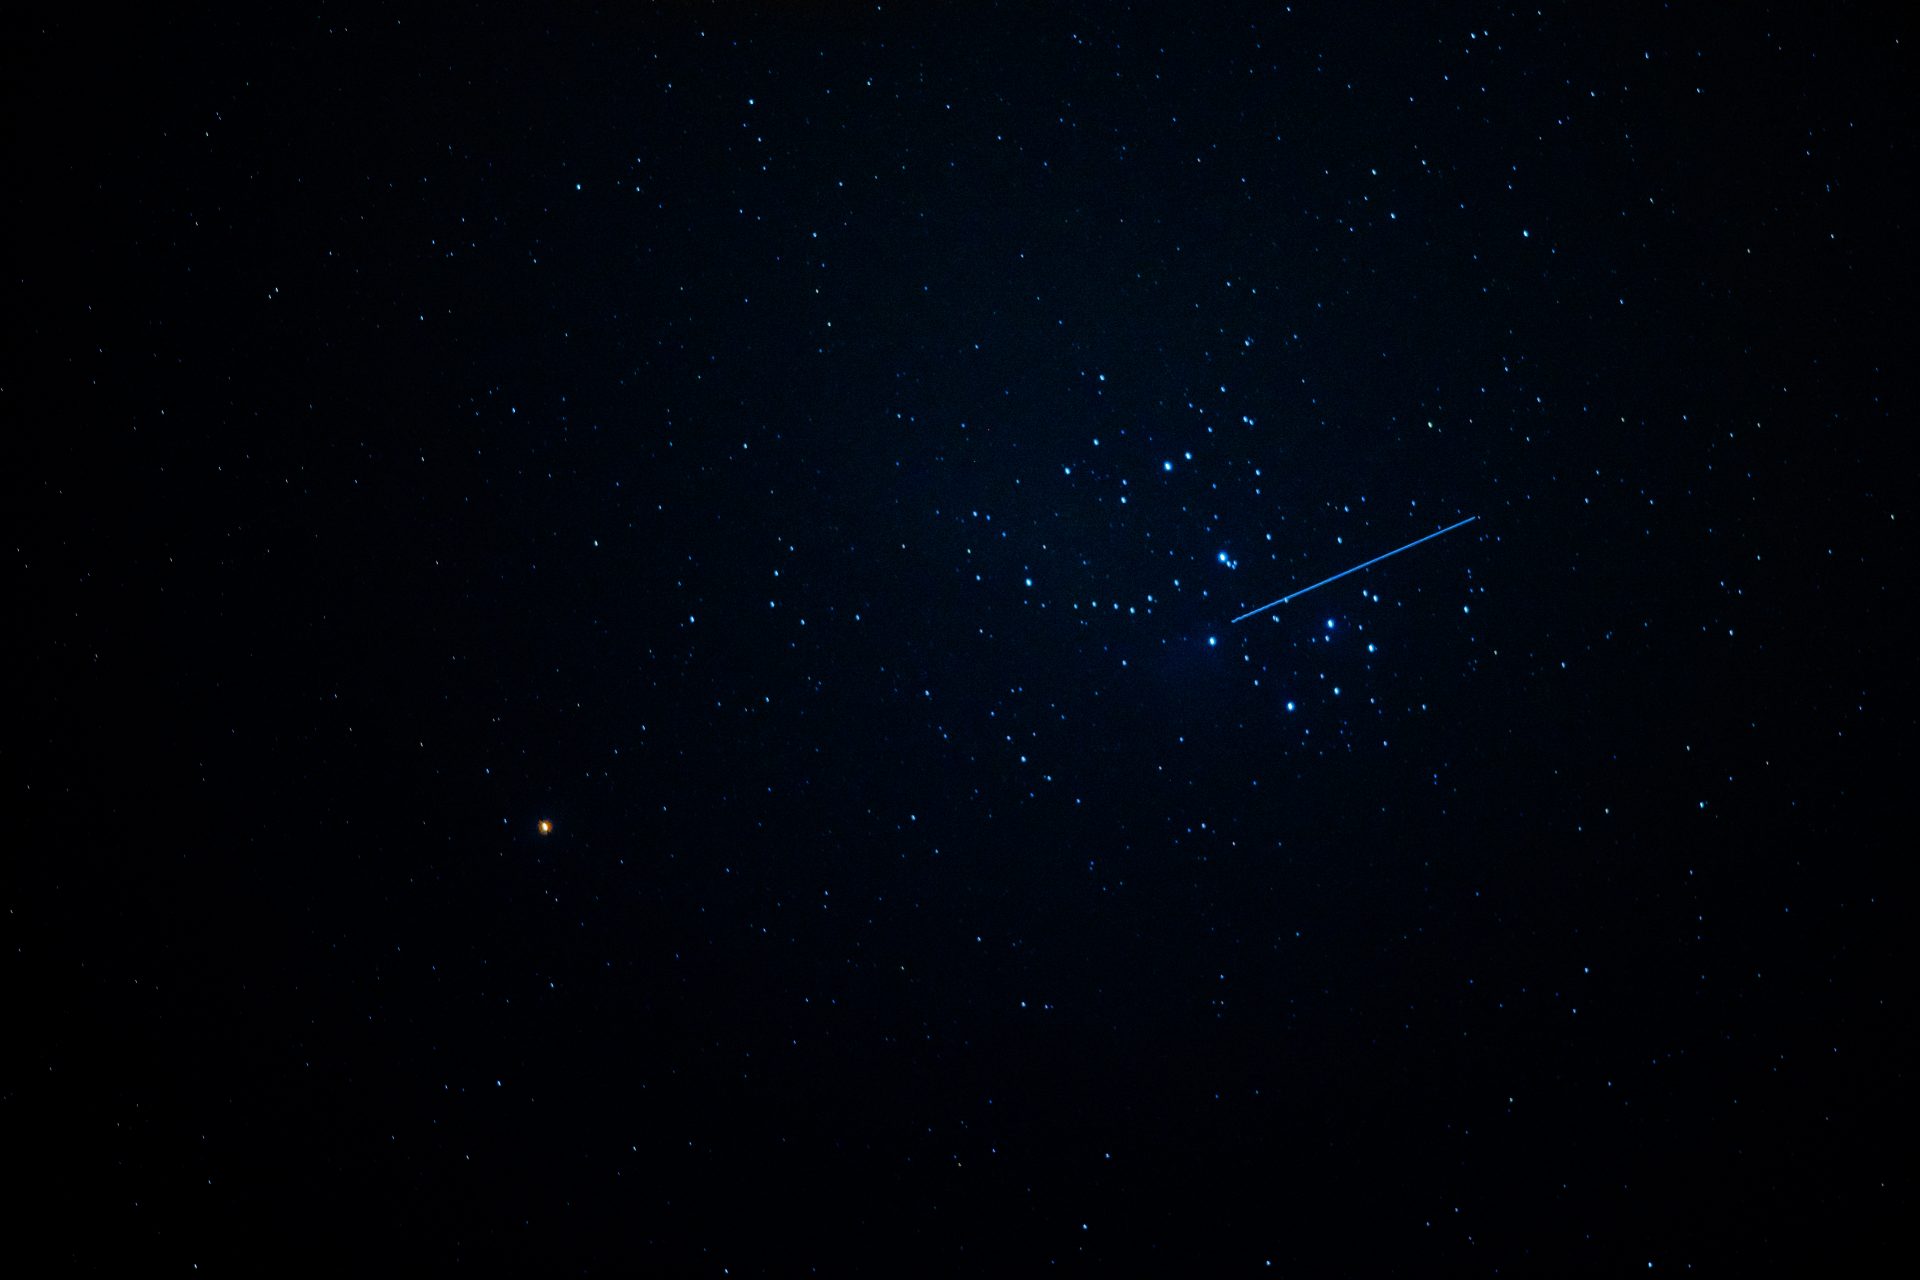 Mars and the Pleiades (20 July)